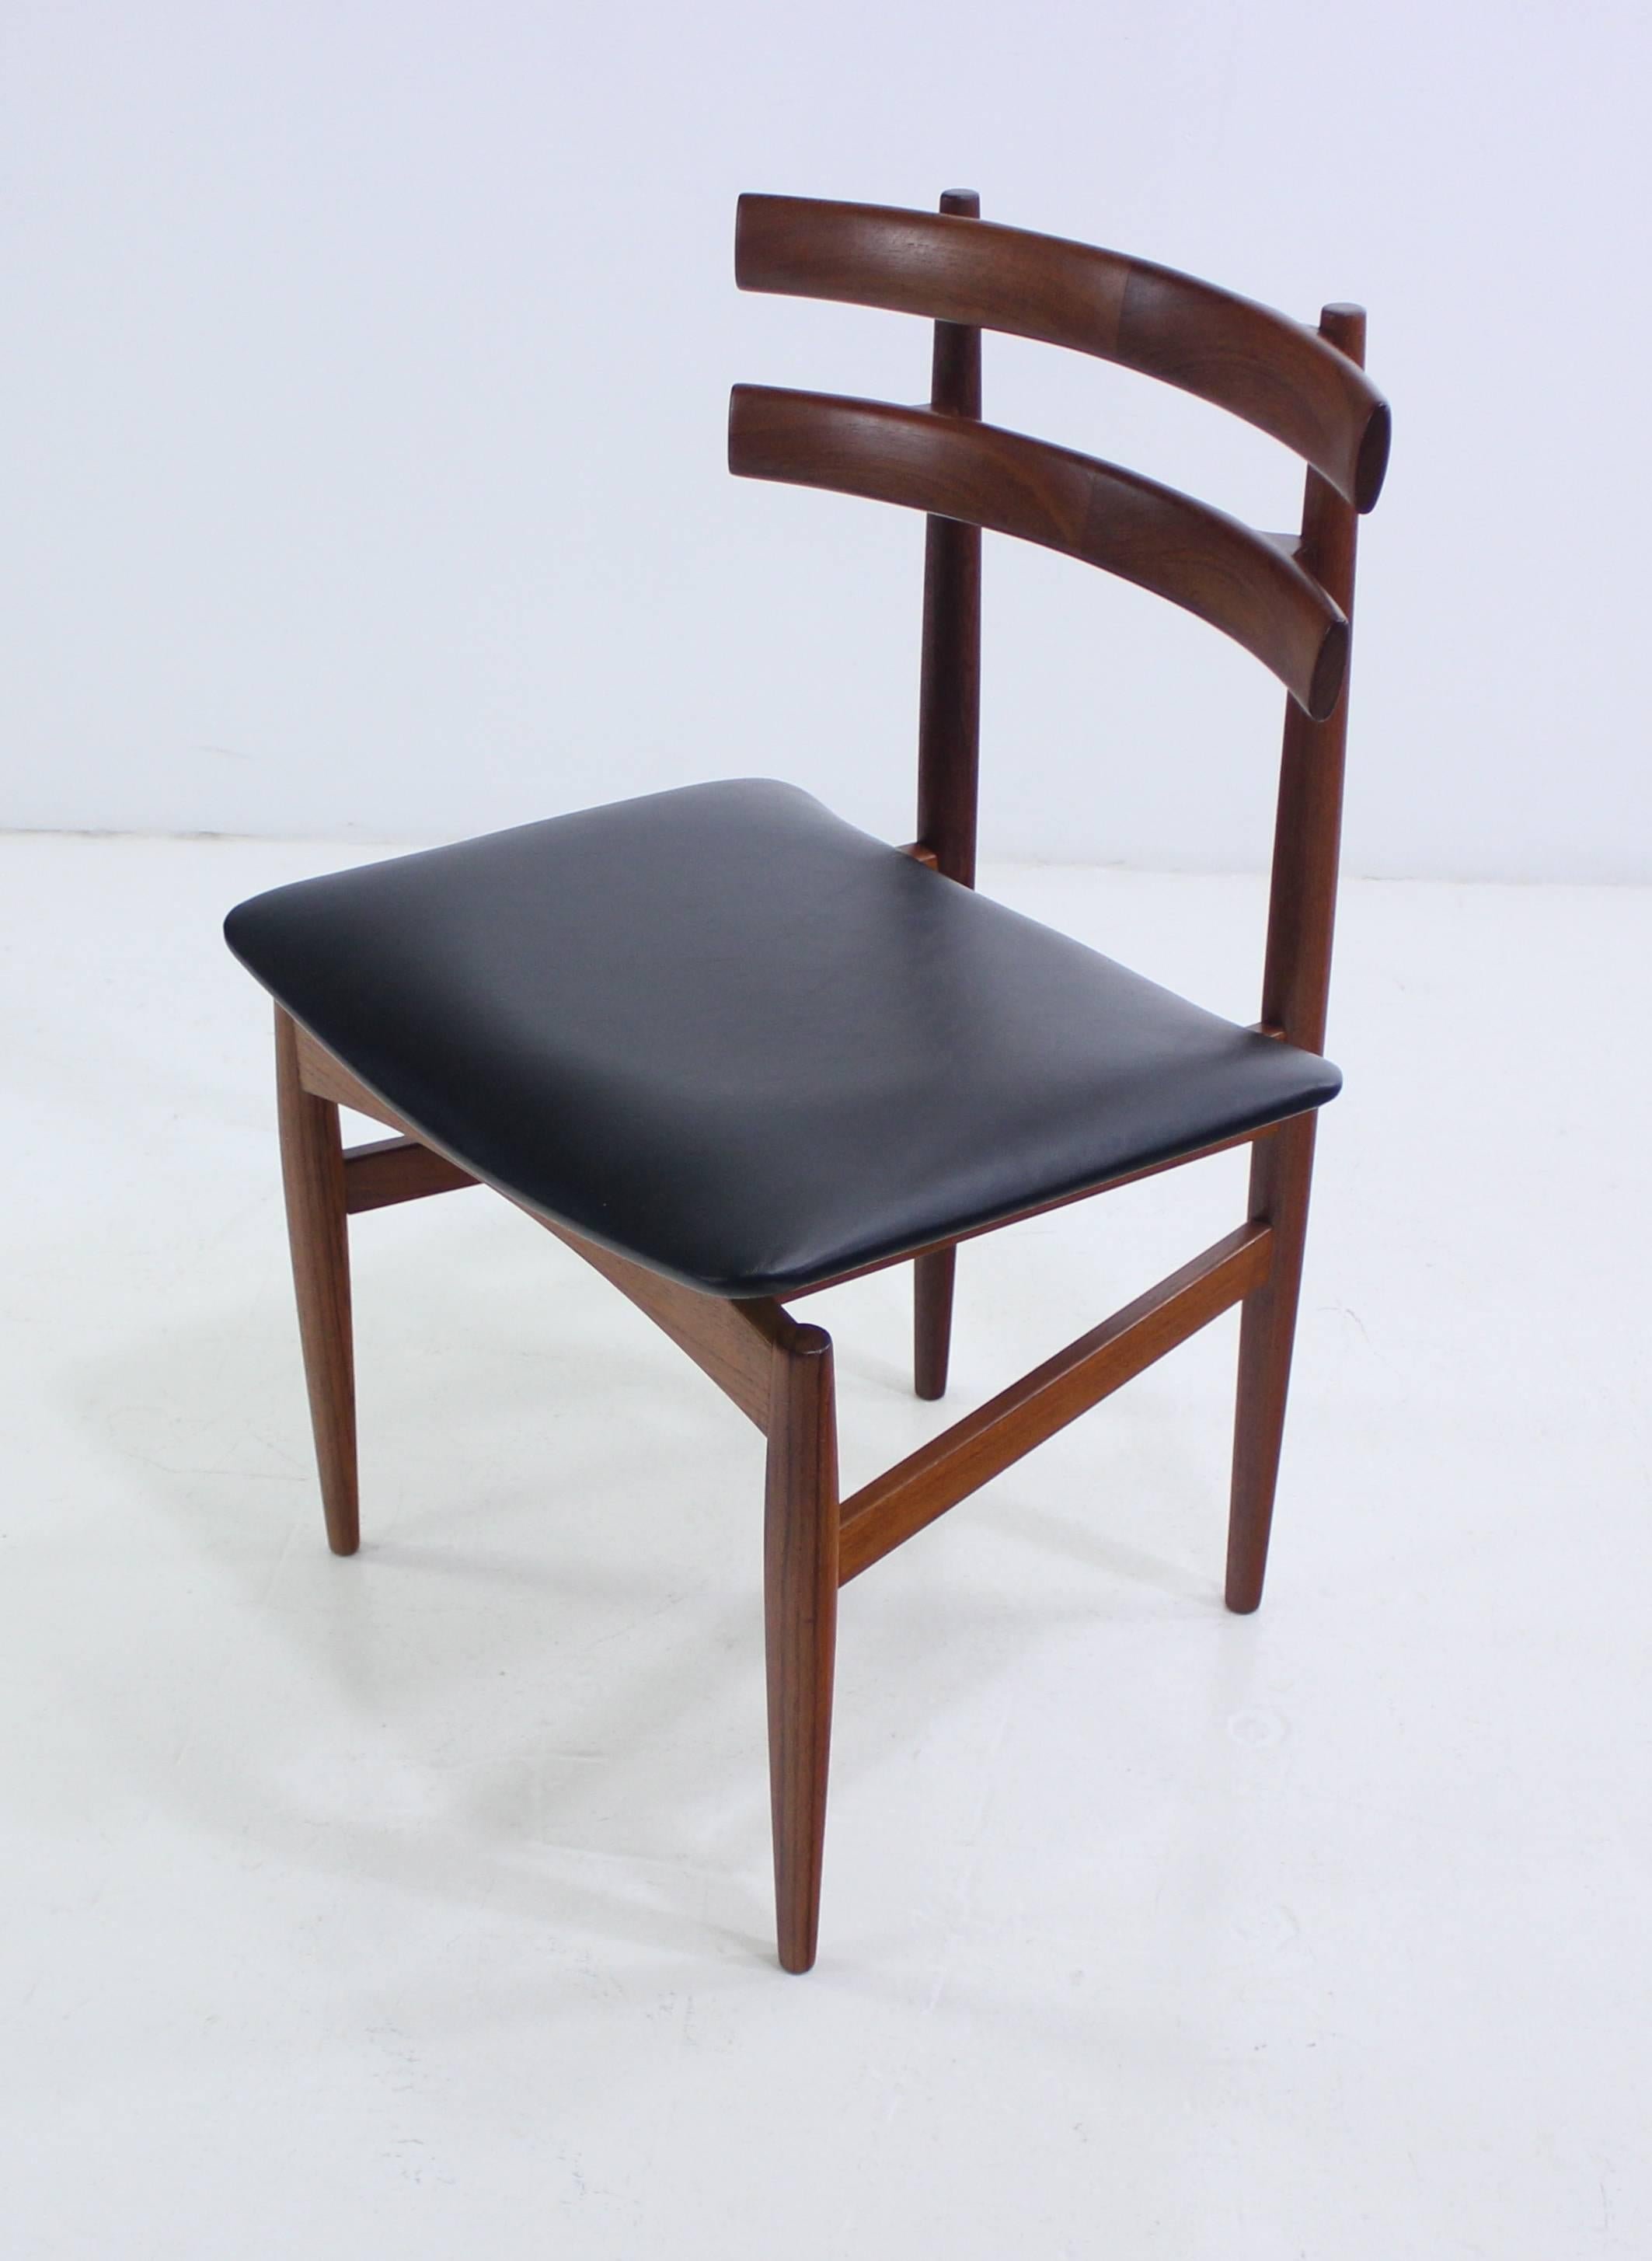 Set of Six Rare Danish Modern Chairs Designed by Poul Hundevad In Excellent Condition For Sale In Portland, OR